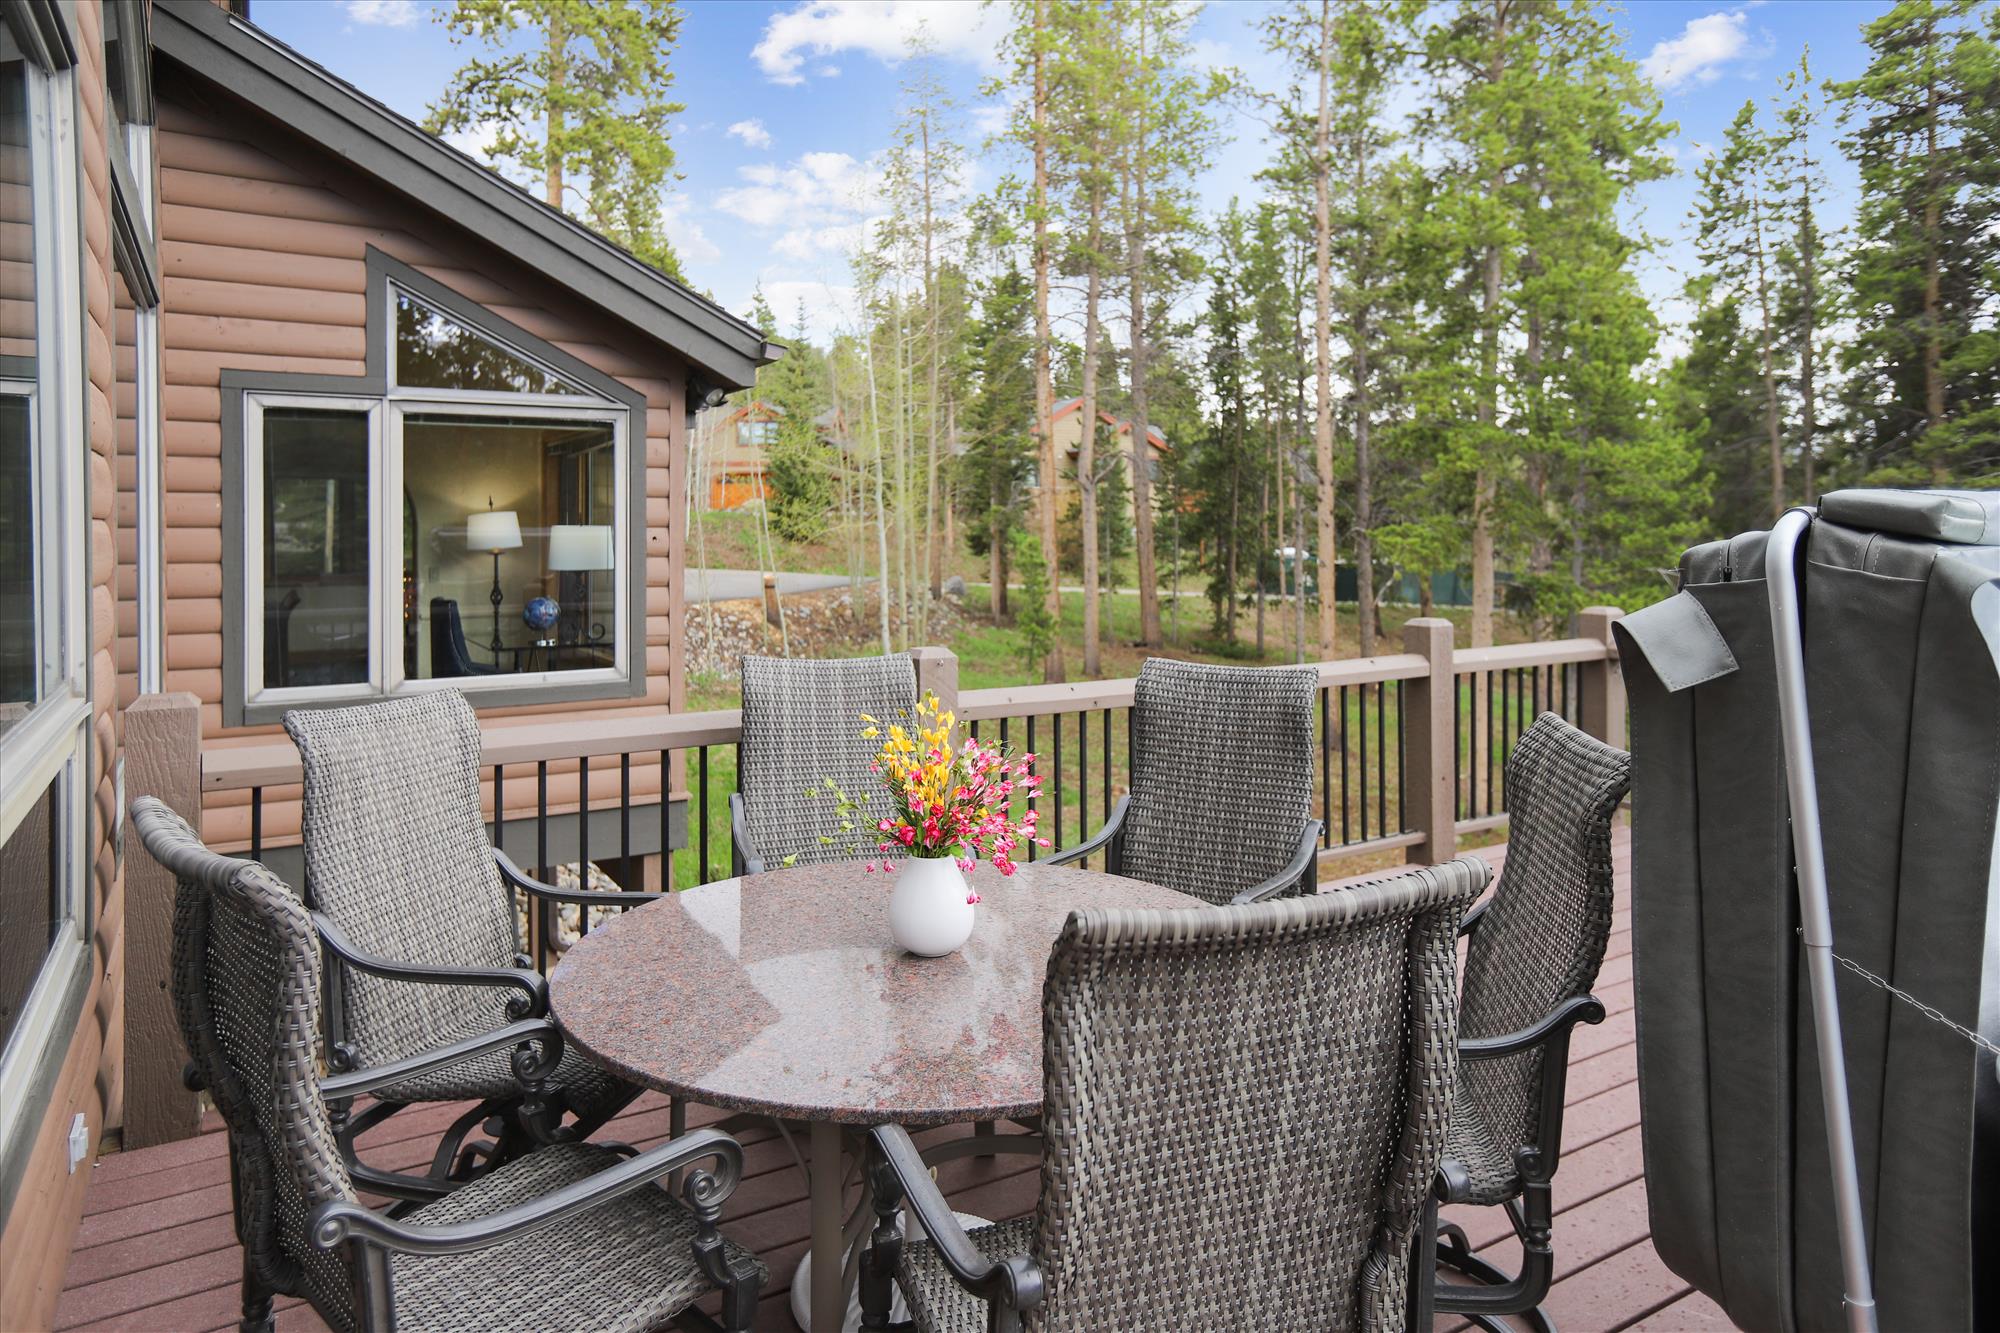 Additional outdoor dining view - Evergreen Lodge Breckenridge Vacation Rental